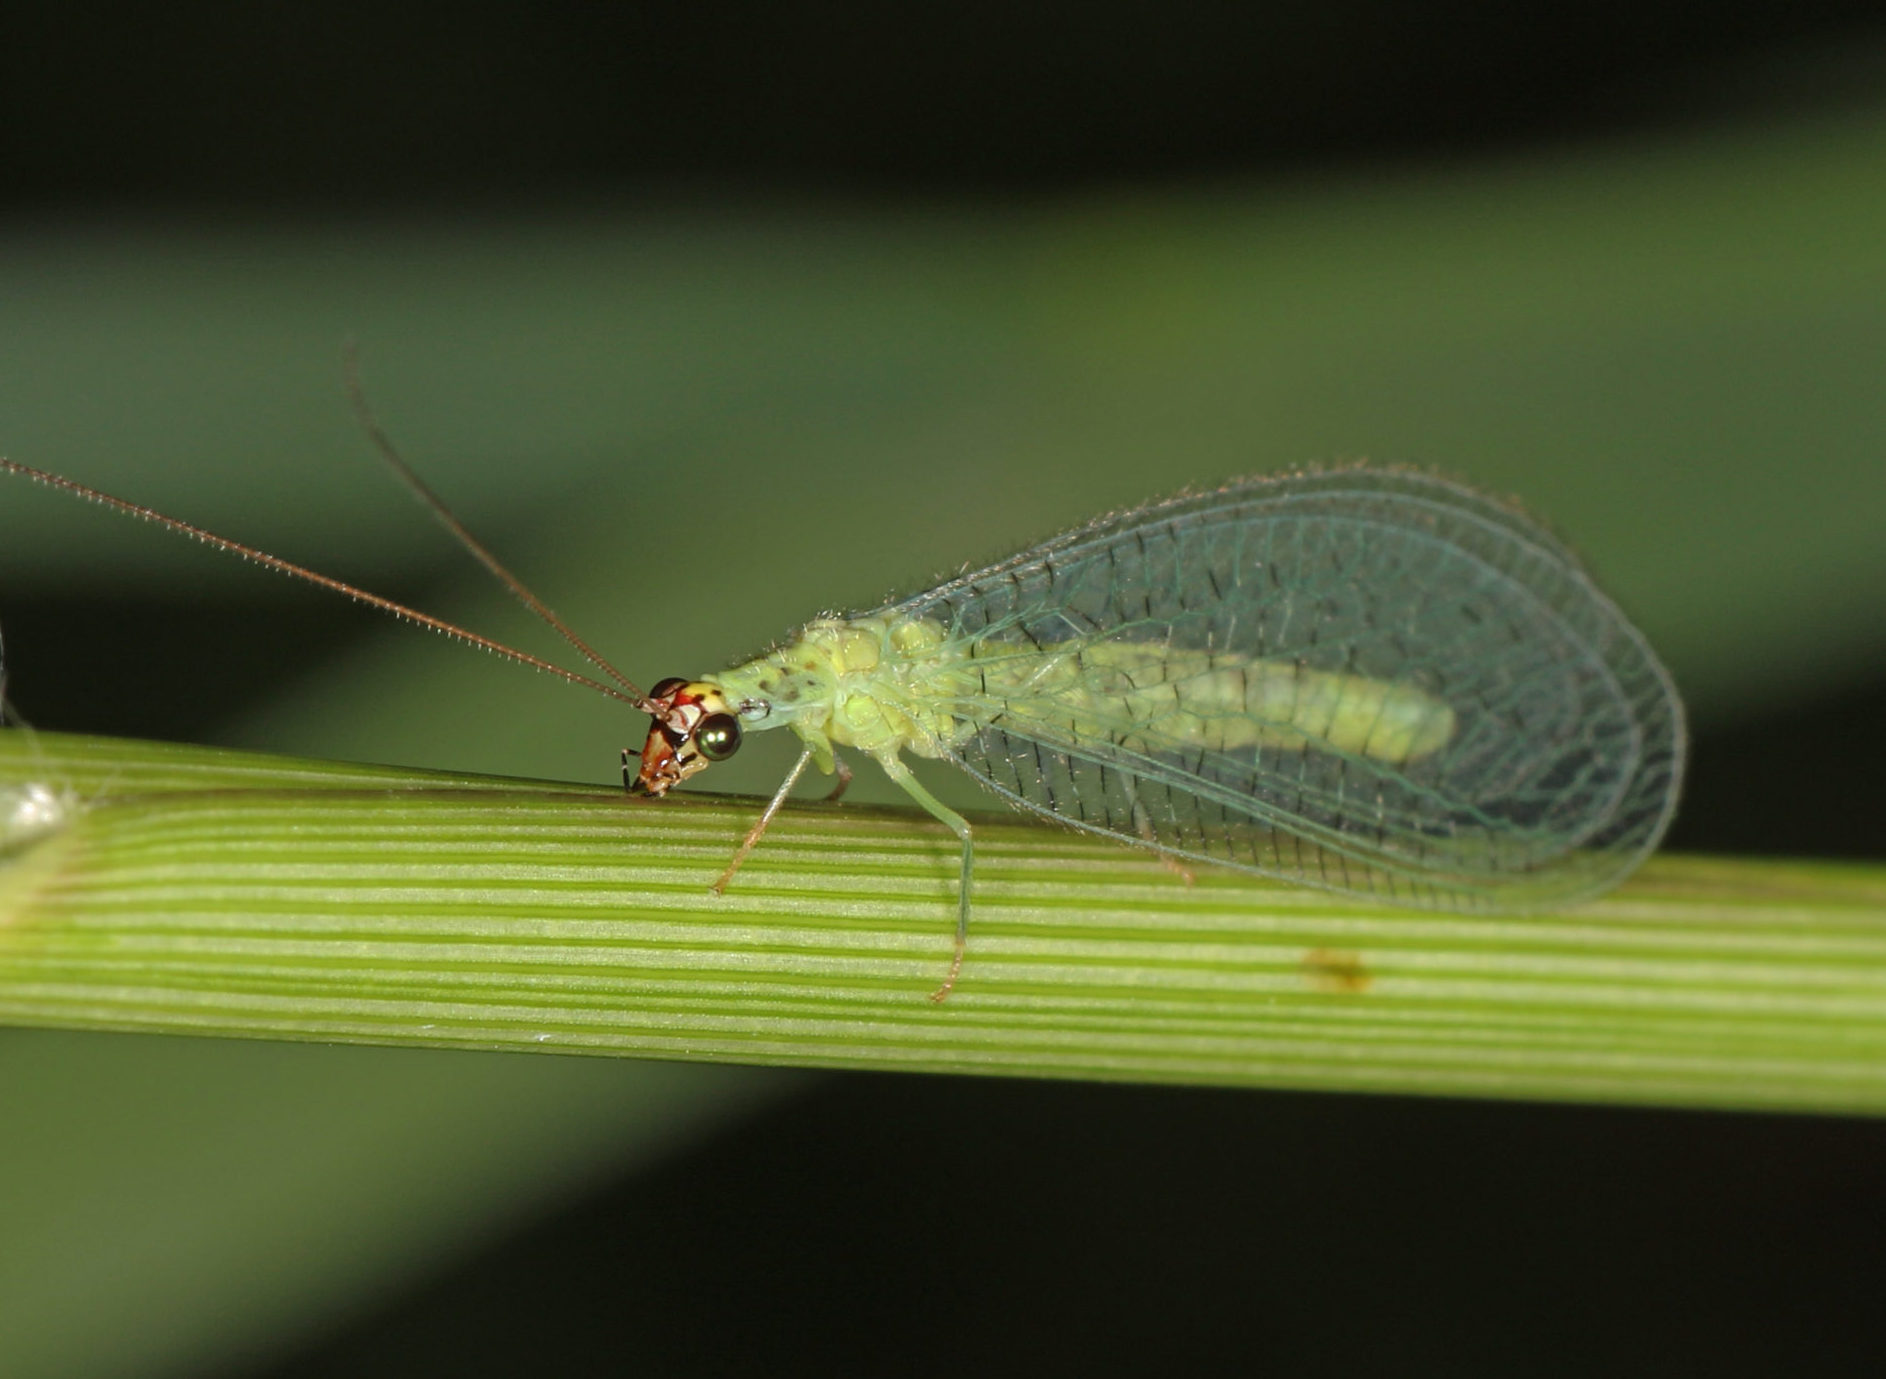 Real Monstrosities: Green Lacewing